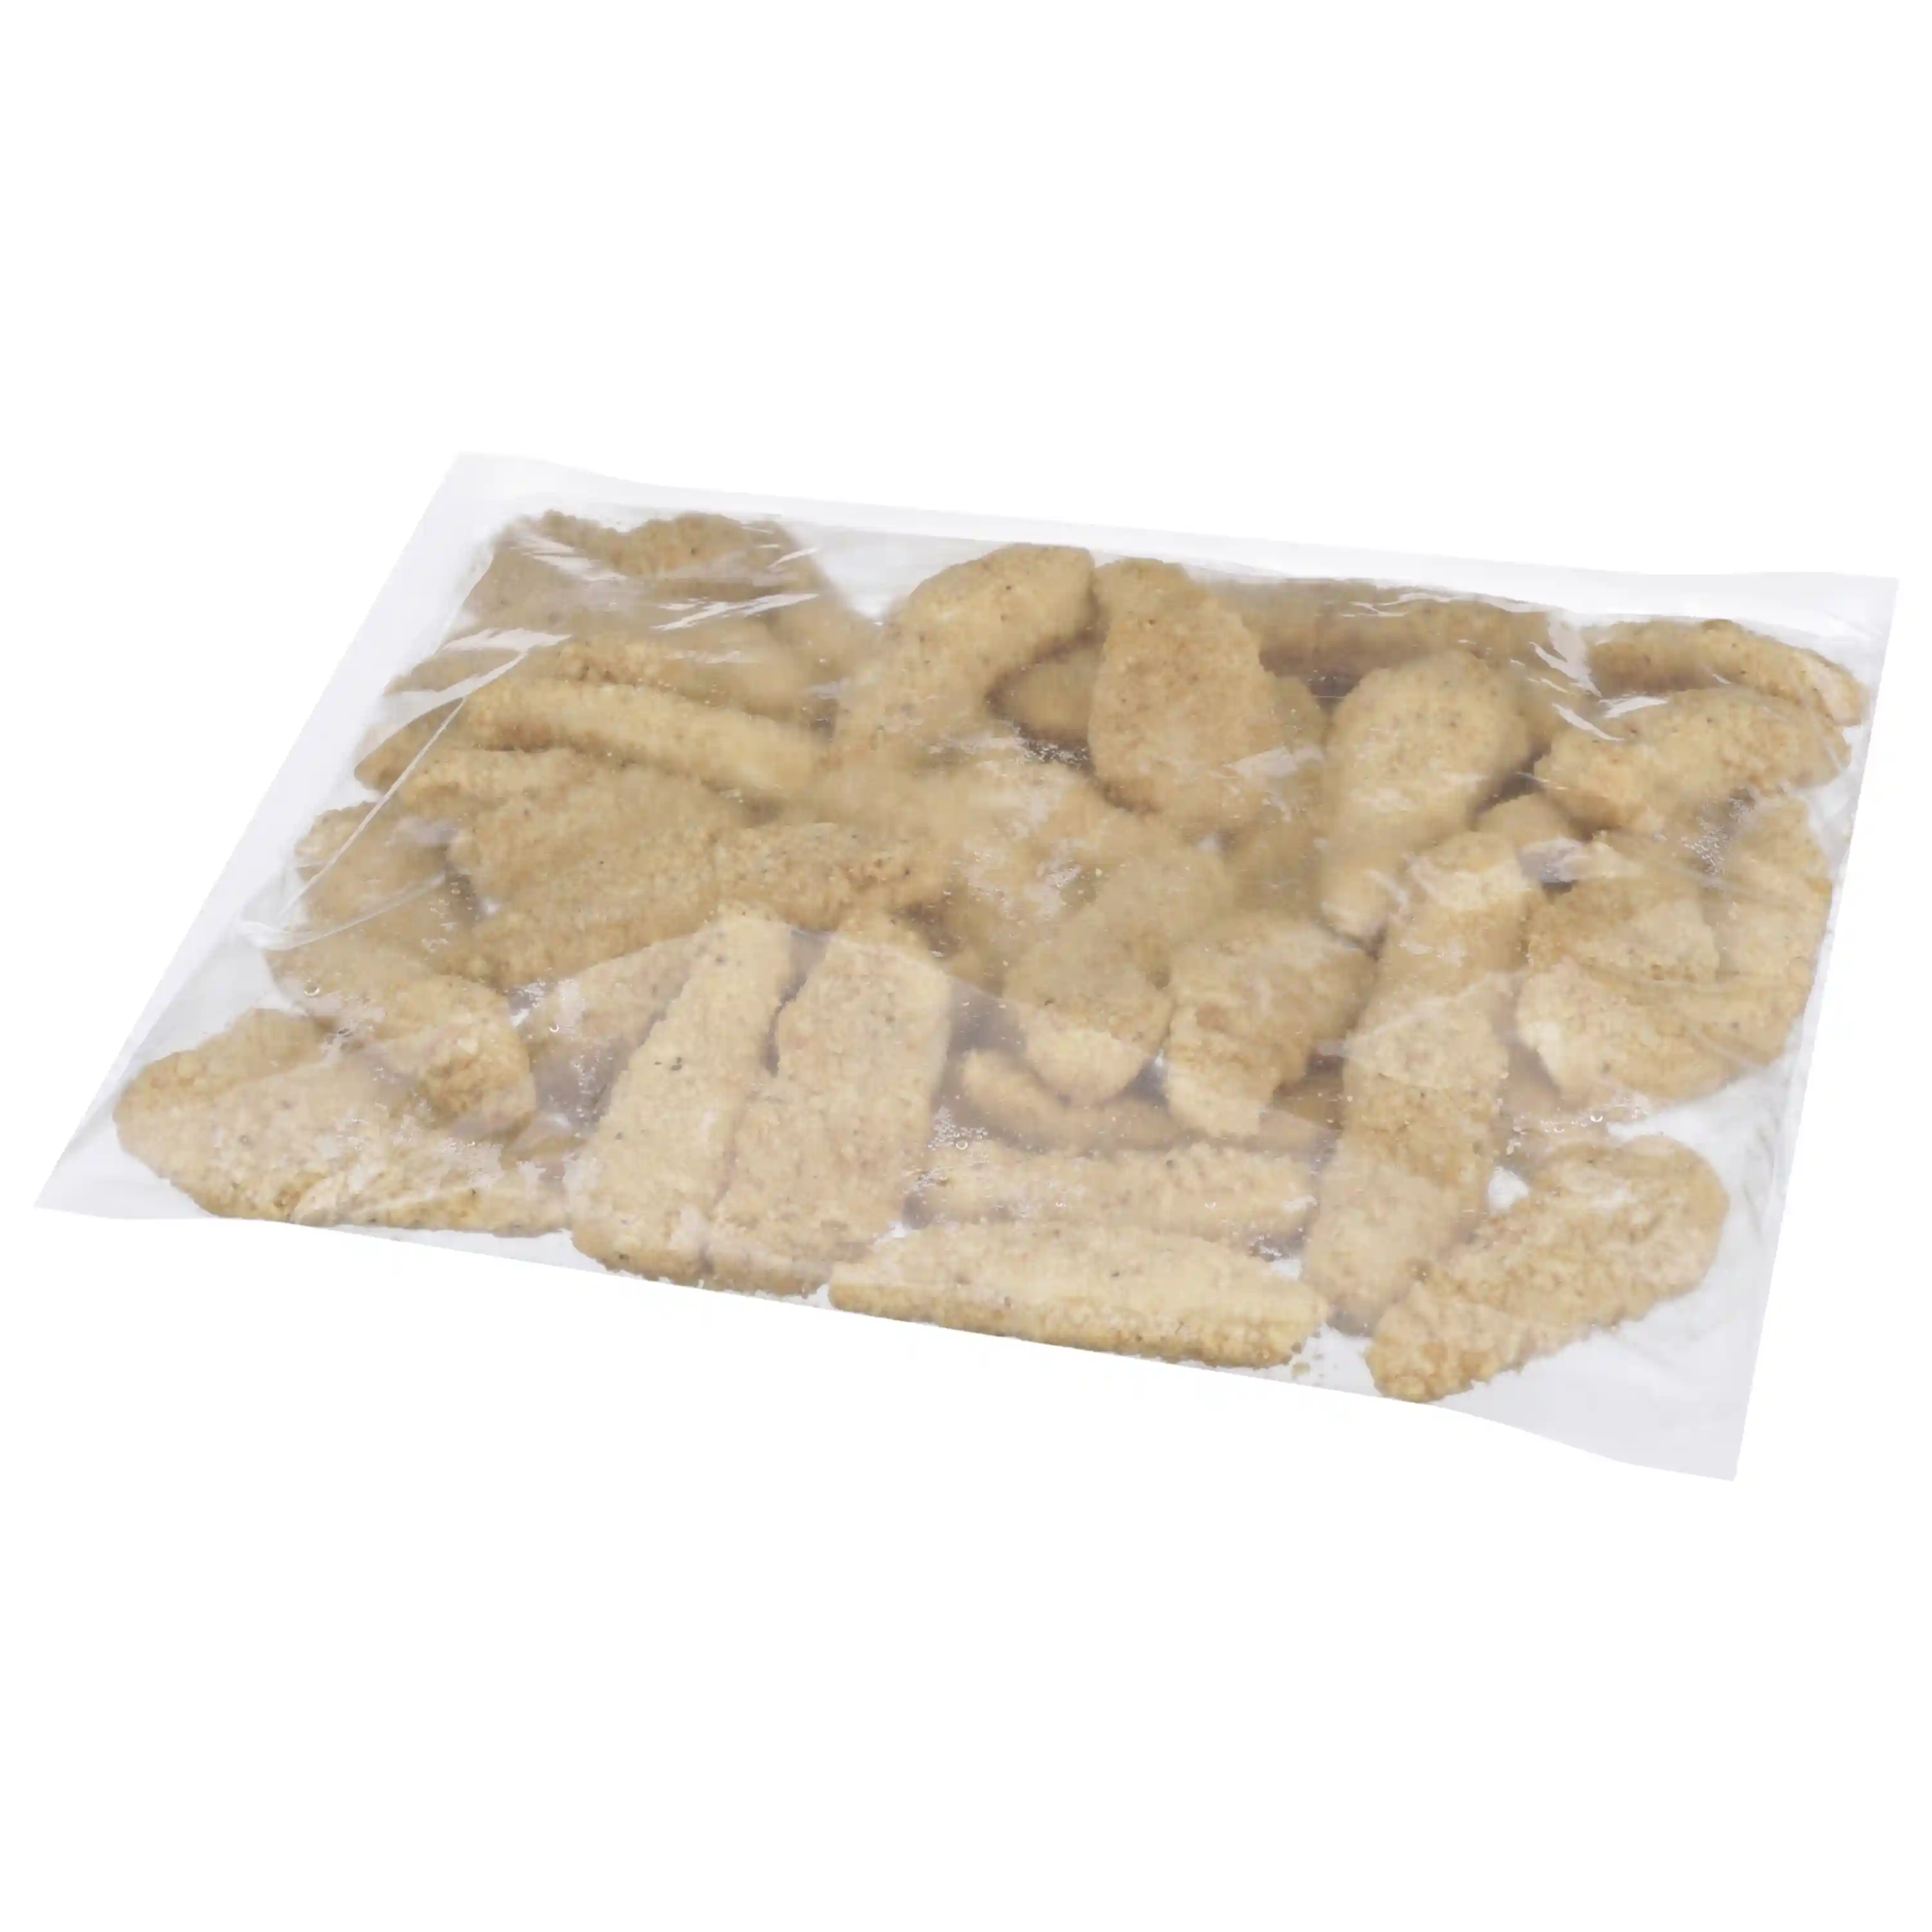 Tyson® Fully Cooked Whole Grain Breaded Homestyle MWWM Chicken Breast Strips, 1.50 oz._image_21